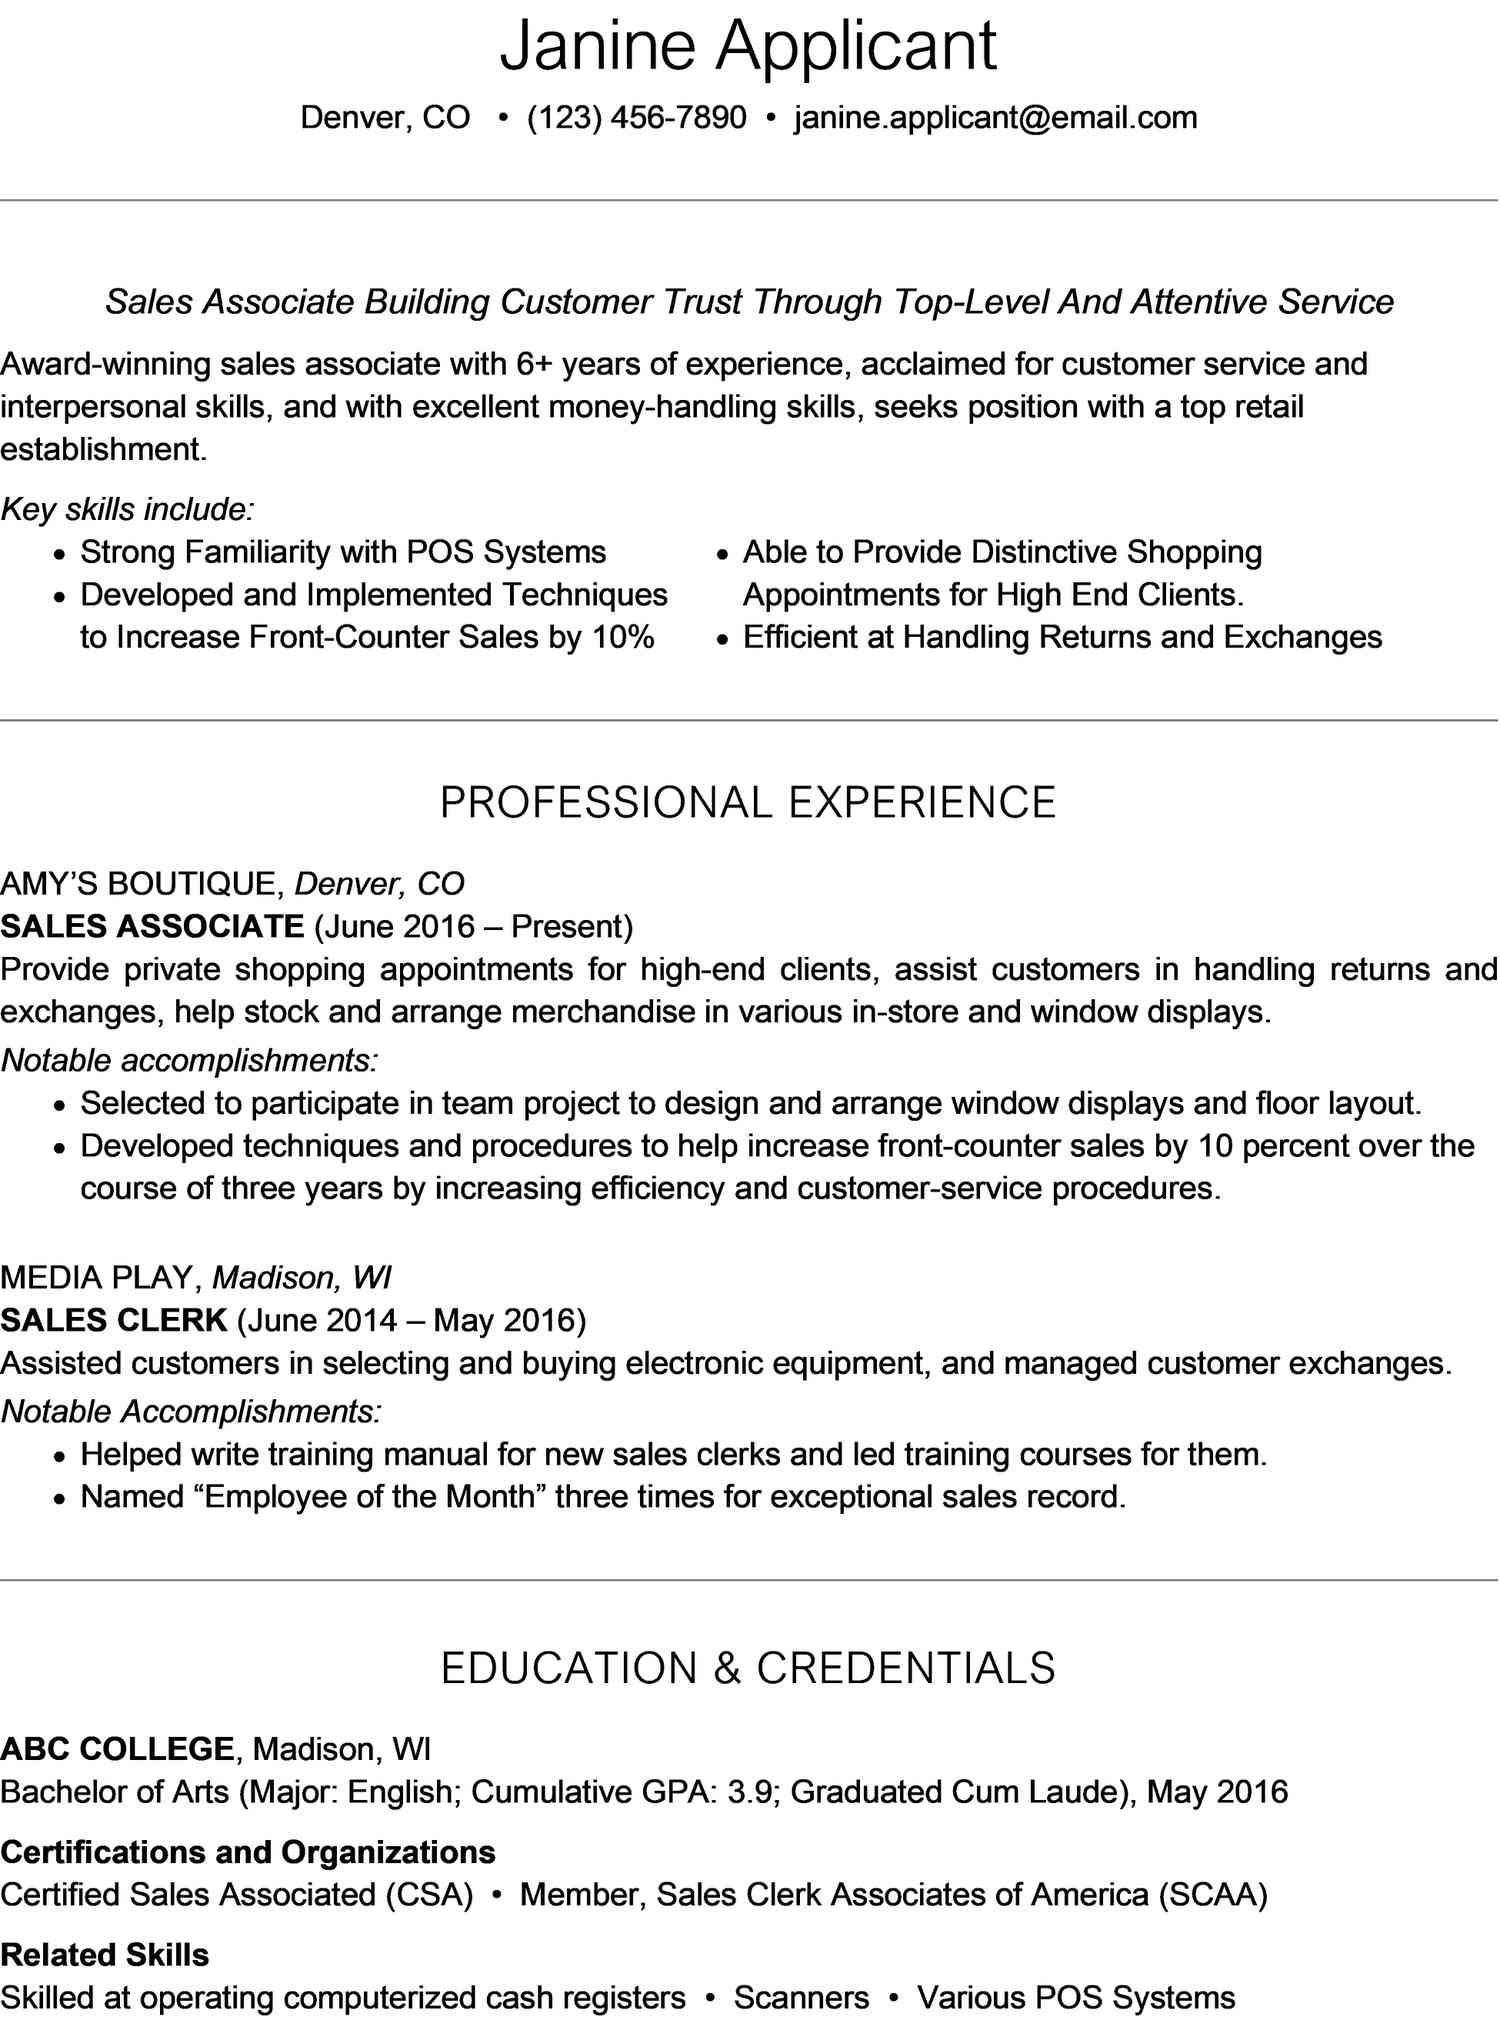 Generic Thank You for Your Resume Sample How to Write A Resume Headline (with Examples)